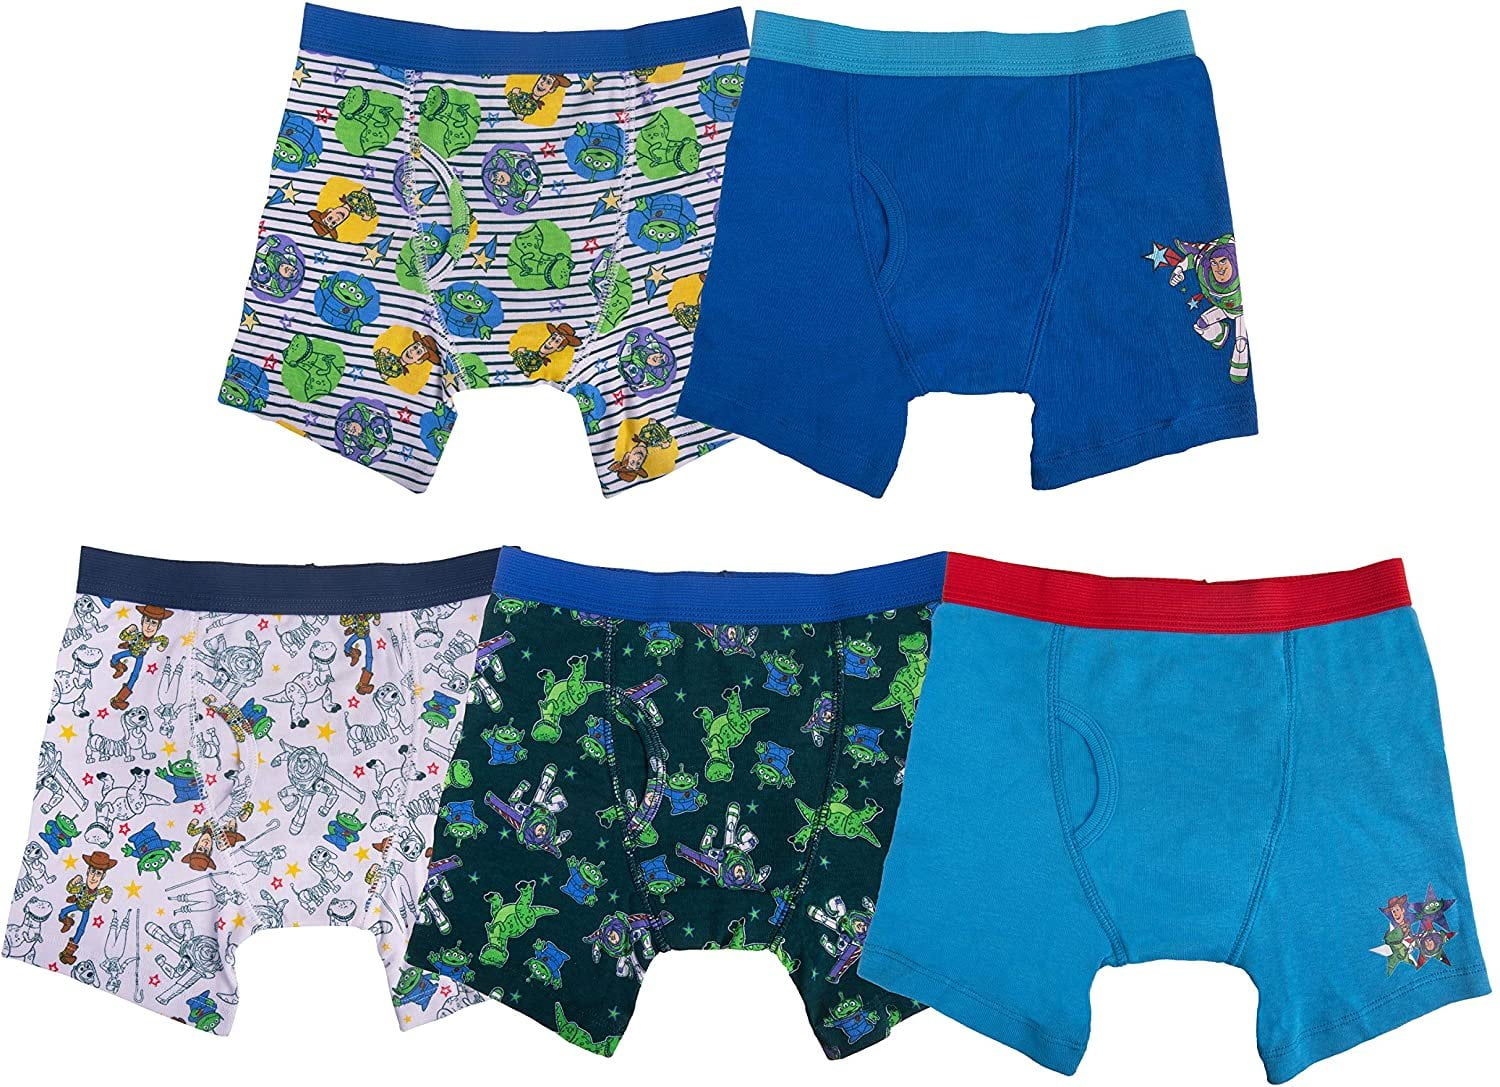 Toy Story Boxer Short Boys Disney Toy Story Underwear Trunk Cotton Age 3-7  Years